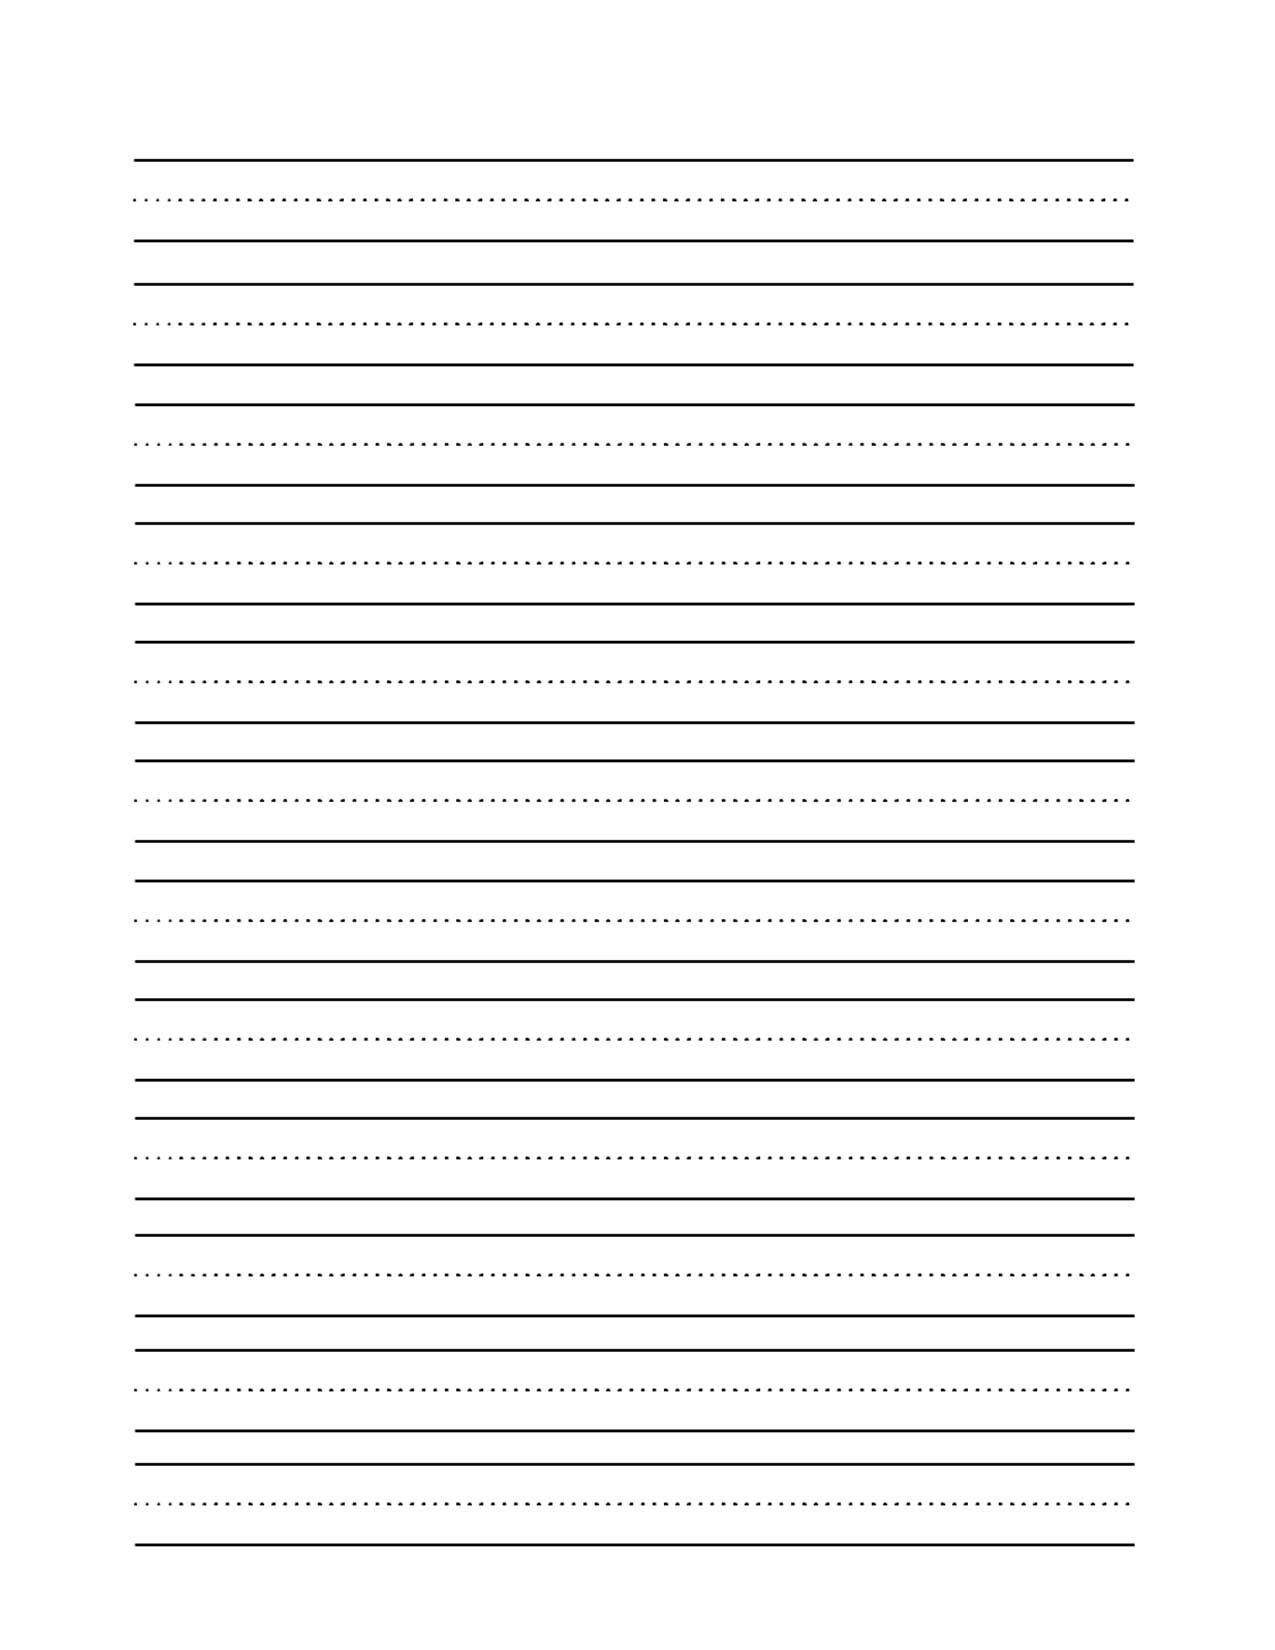 Blank Writing Practice Sheets Image